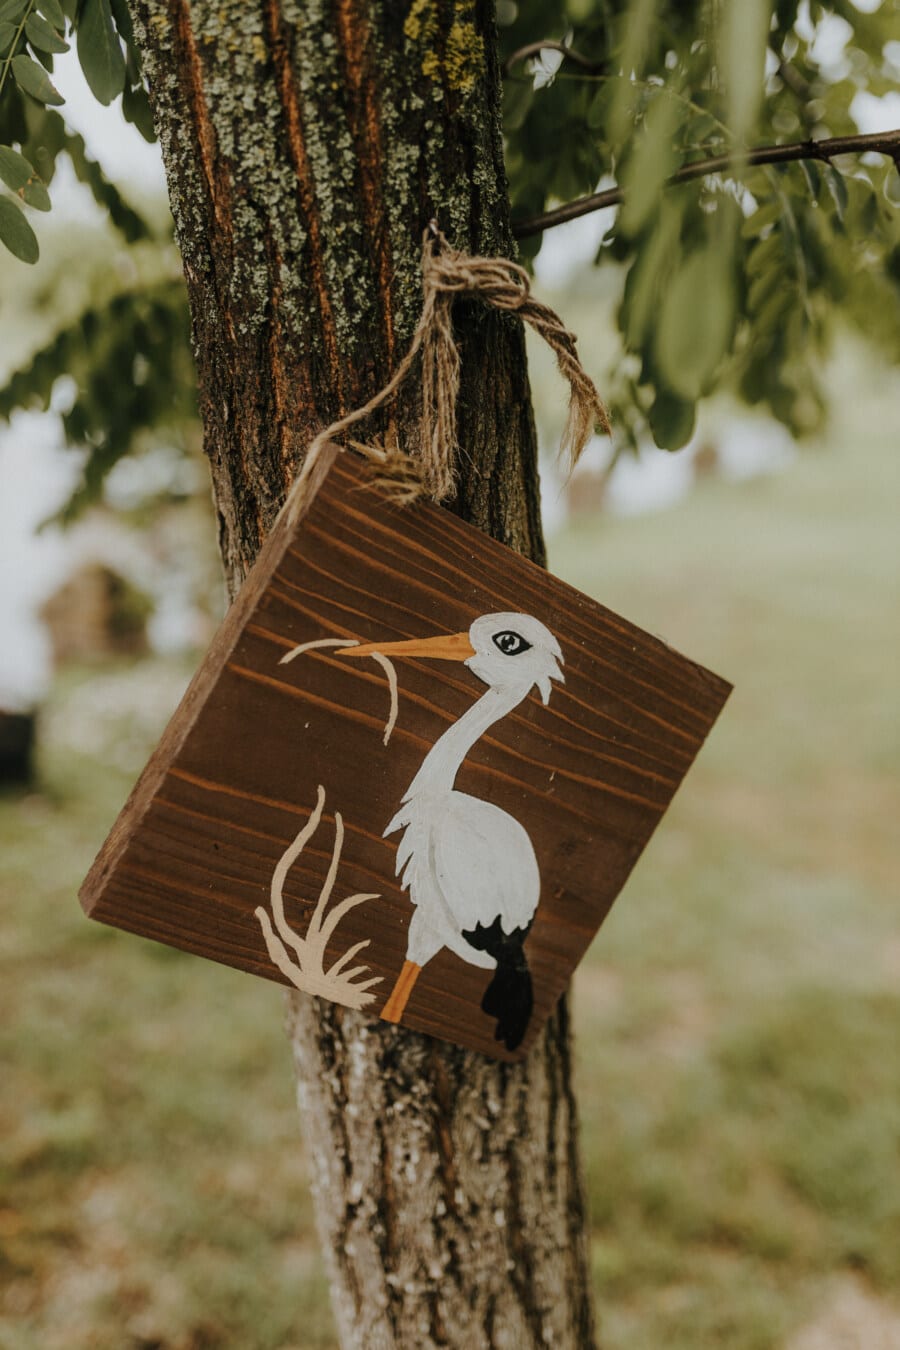 white stork, wooden, decorative, sign, handmade, hanging, old fashioned, tree, outdoors, leaf